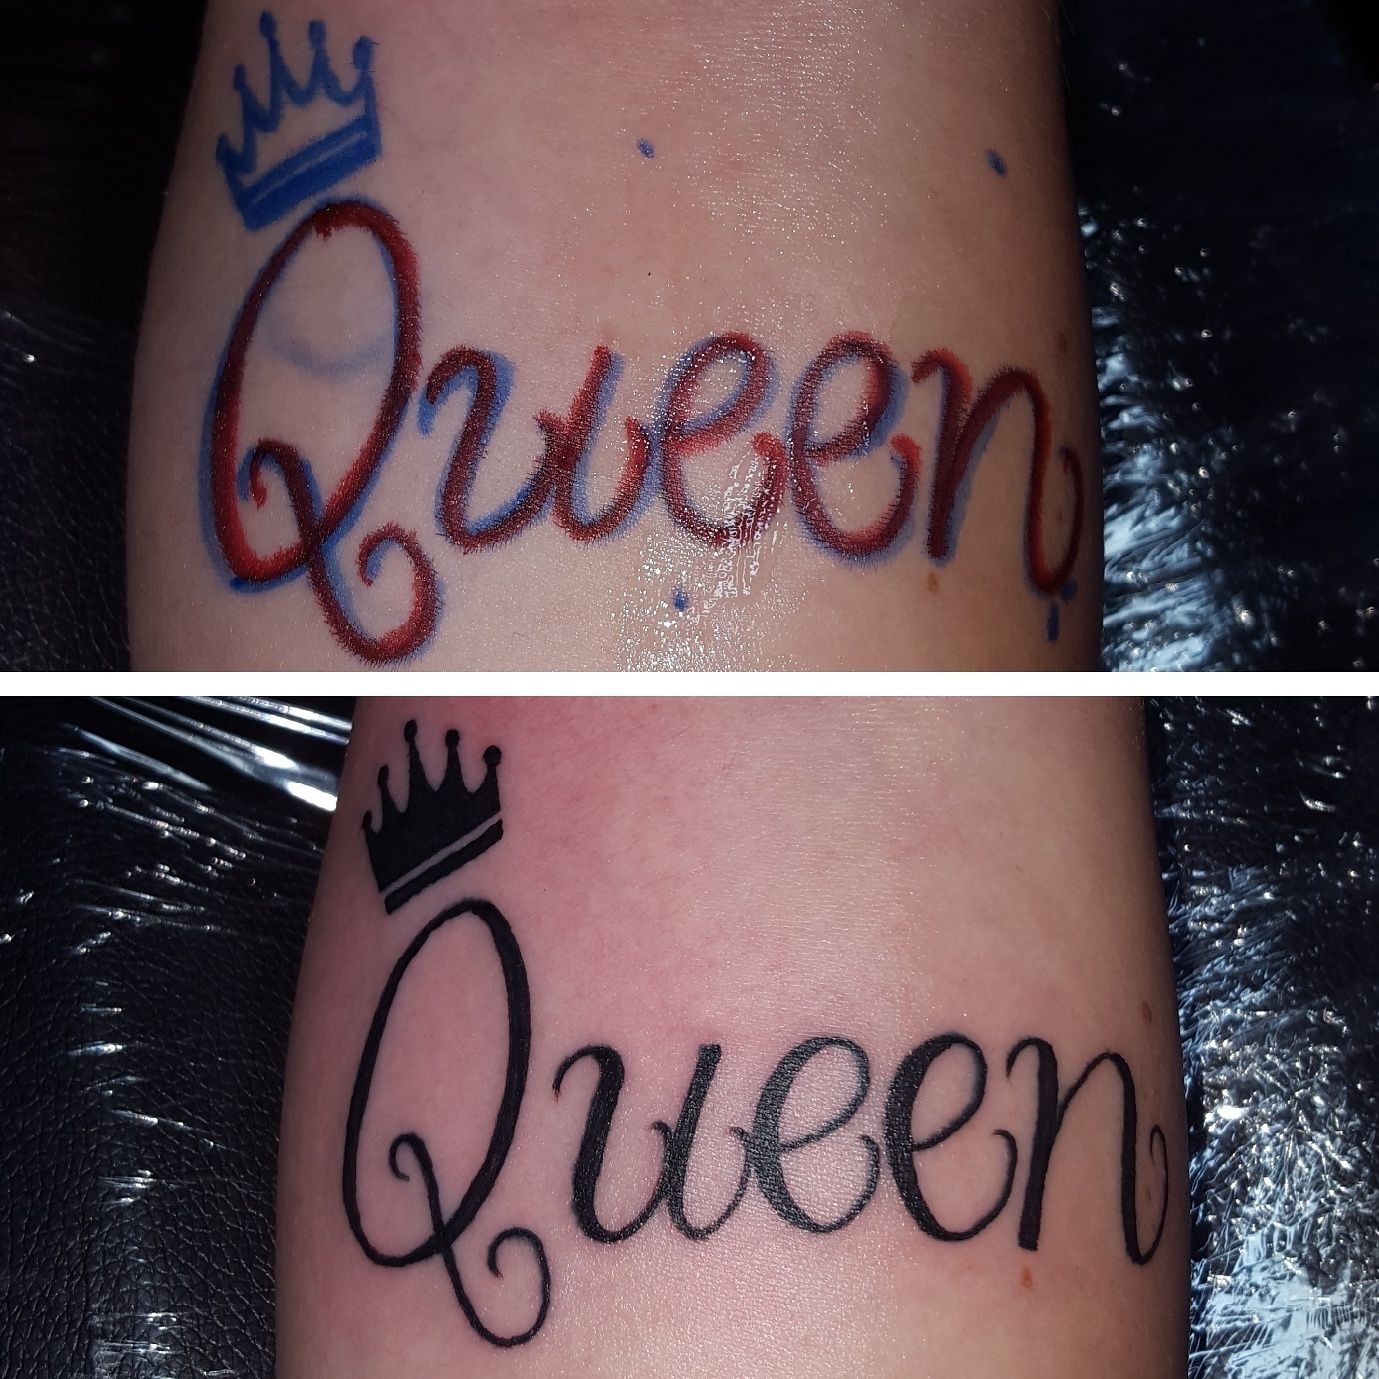 Couples Tattoos - 50 King and Queen Tattoos for Couples - TattooViral.com |  Your Number One source for daily Tattoo designs, Ideas & Inspiration